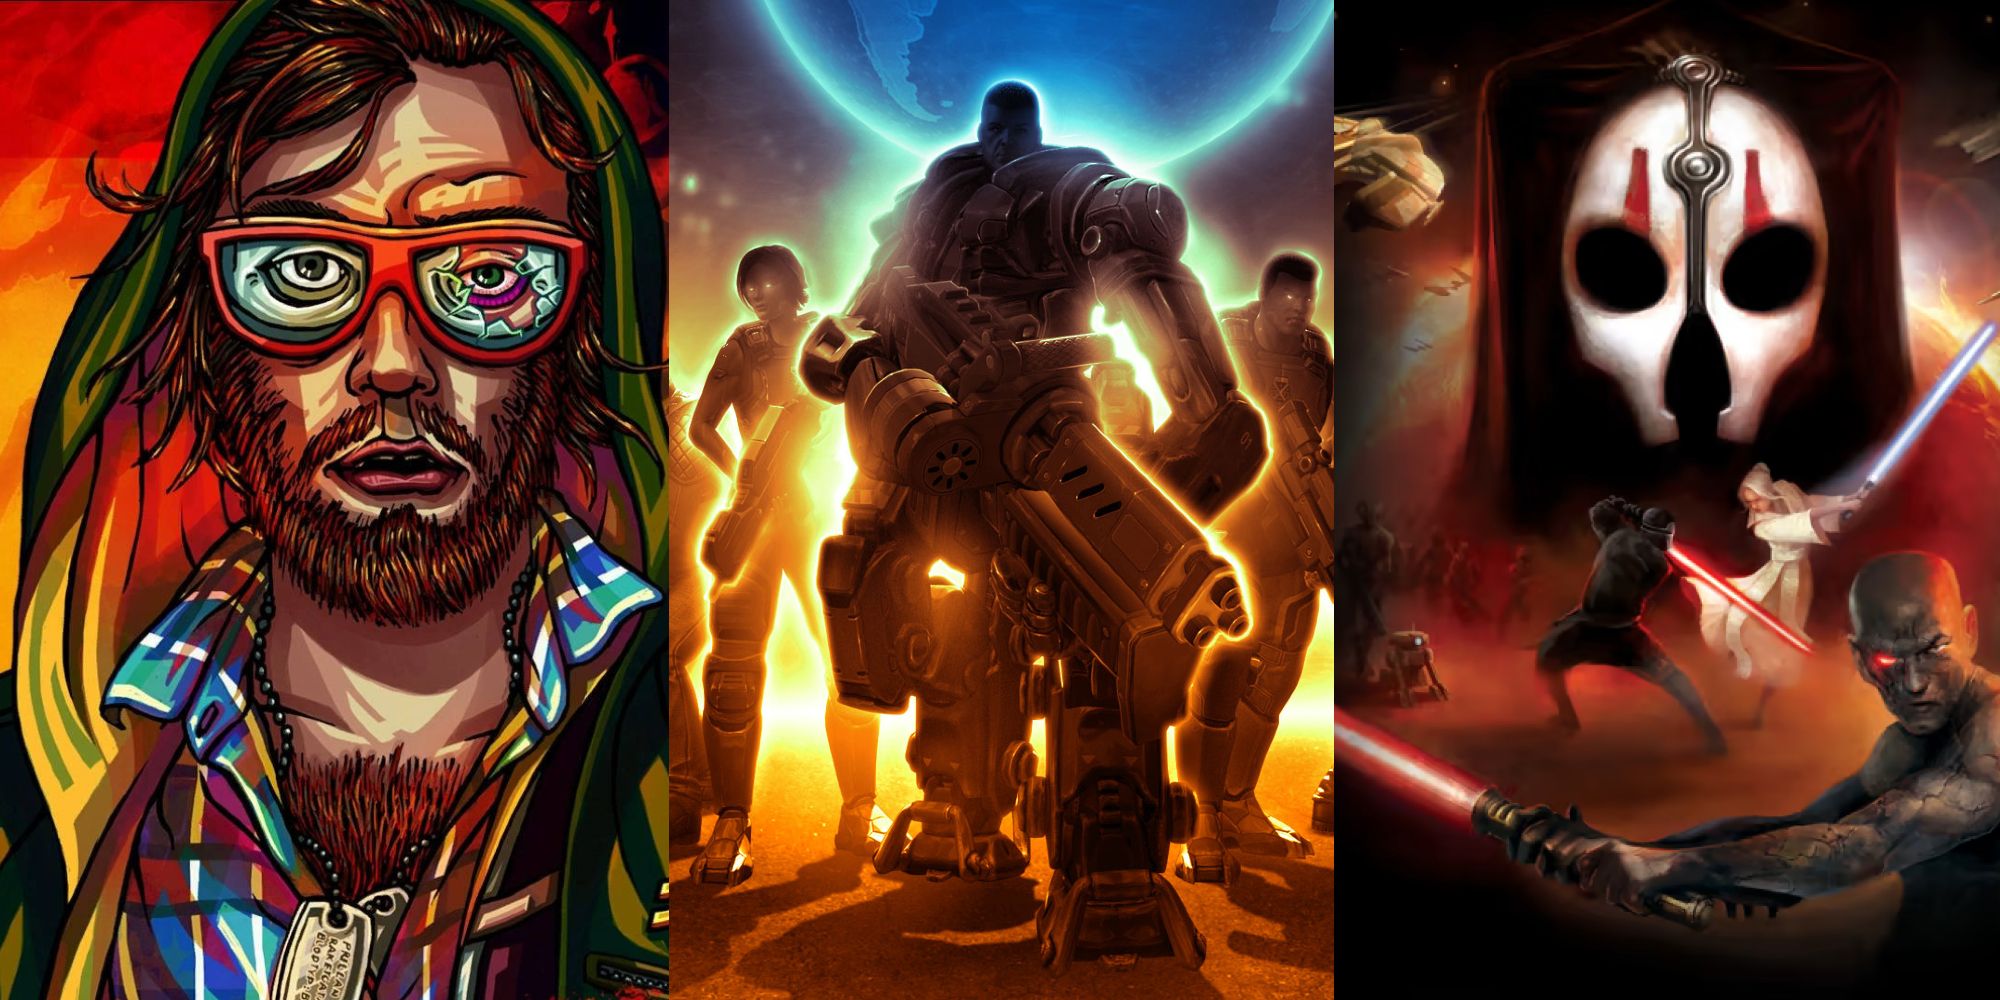 Split images of Hotline Miami 2, XCOM: Enemy Unknown, and Knights of the Old Republic II